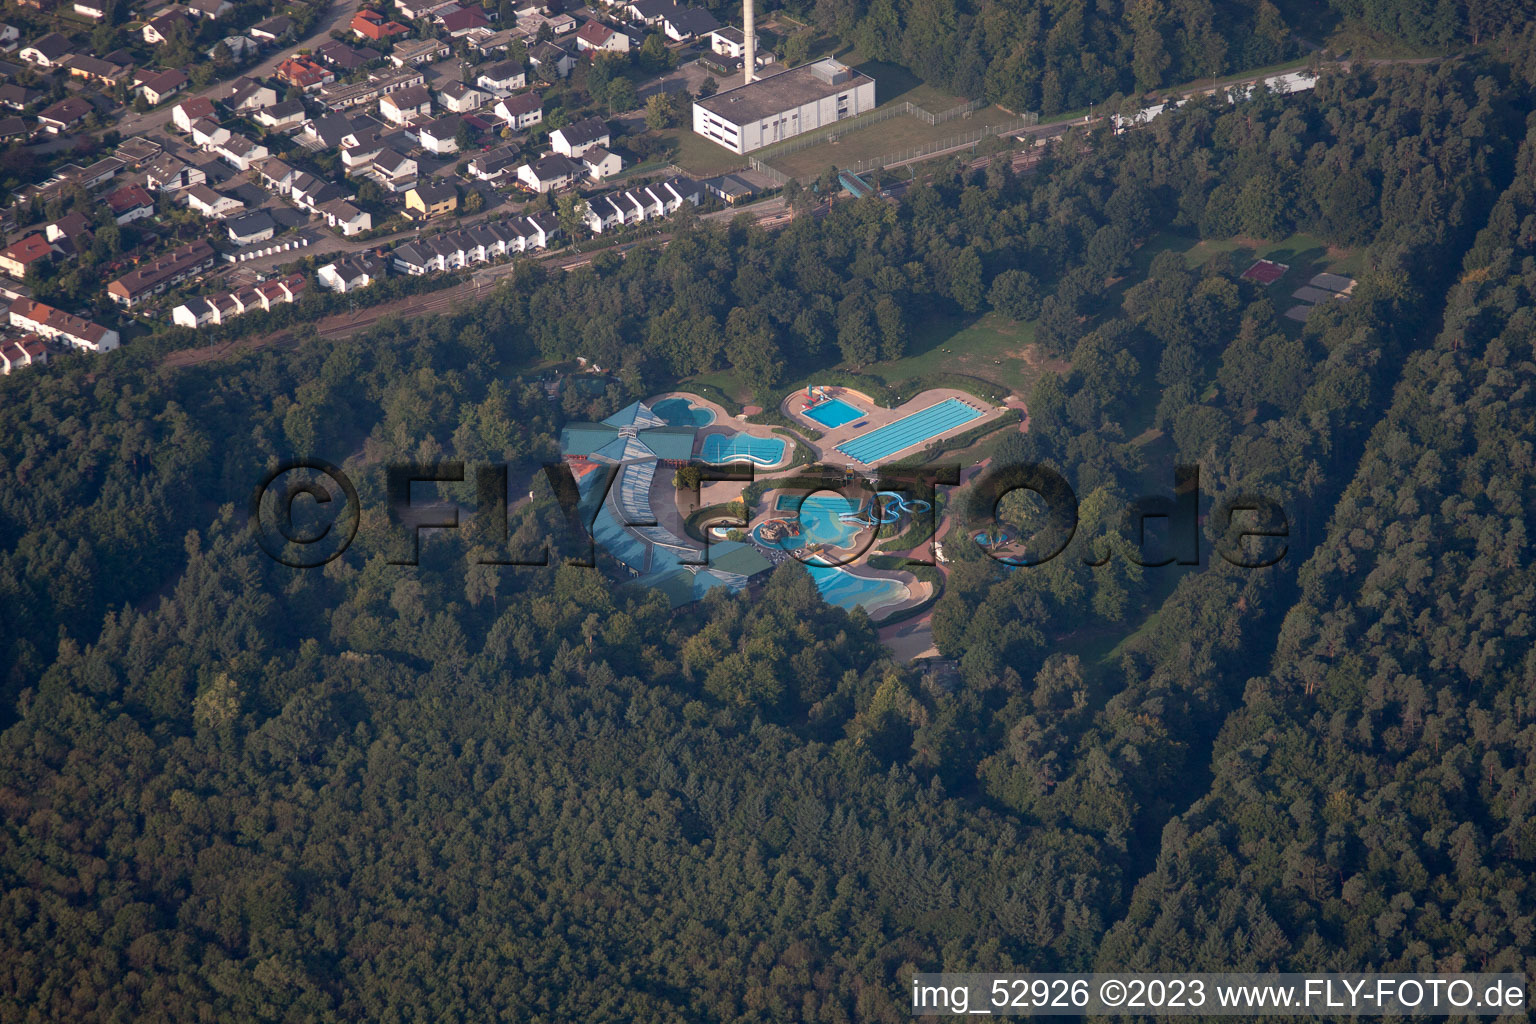 Oblique view of Bathing park in Wörth am Rhein in the state Rhineland-Palatinate, Germany